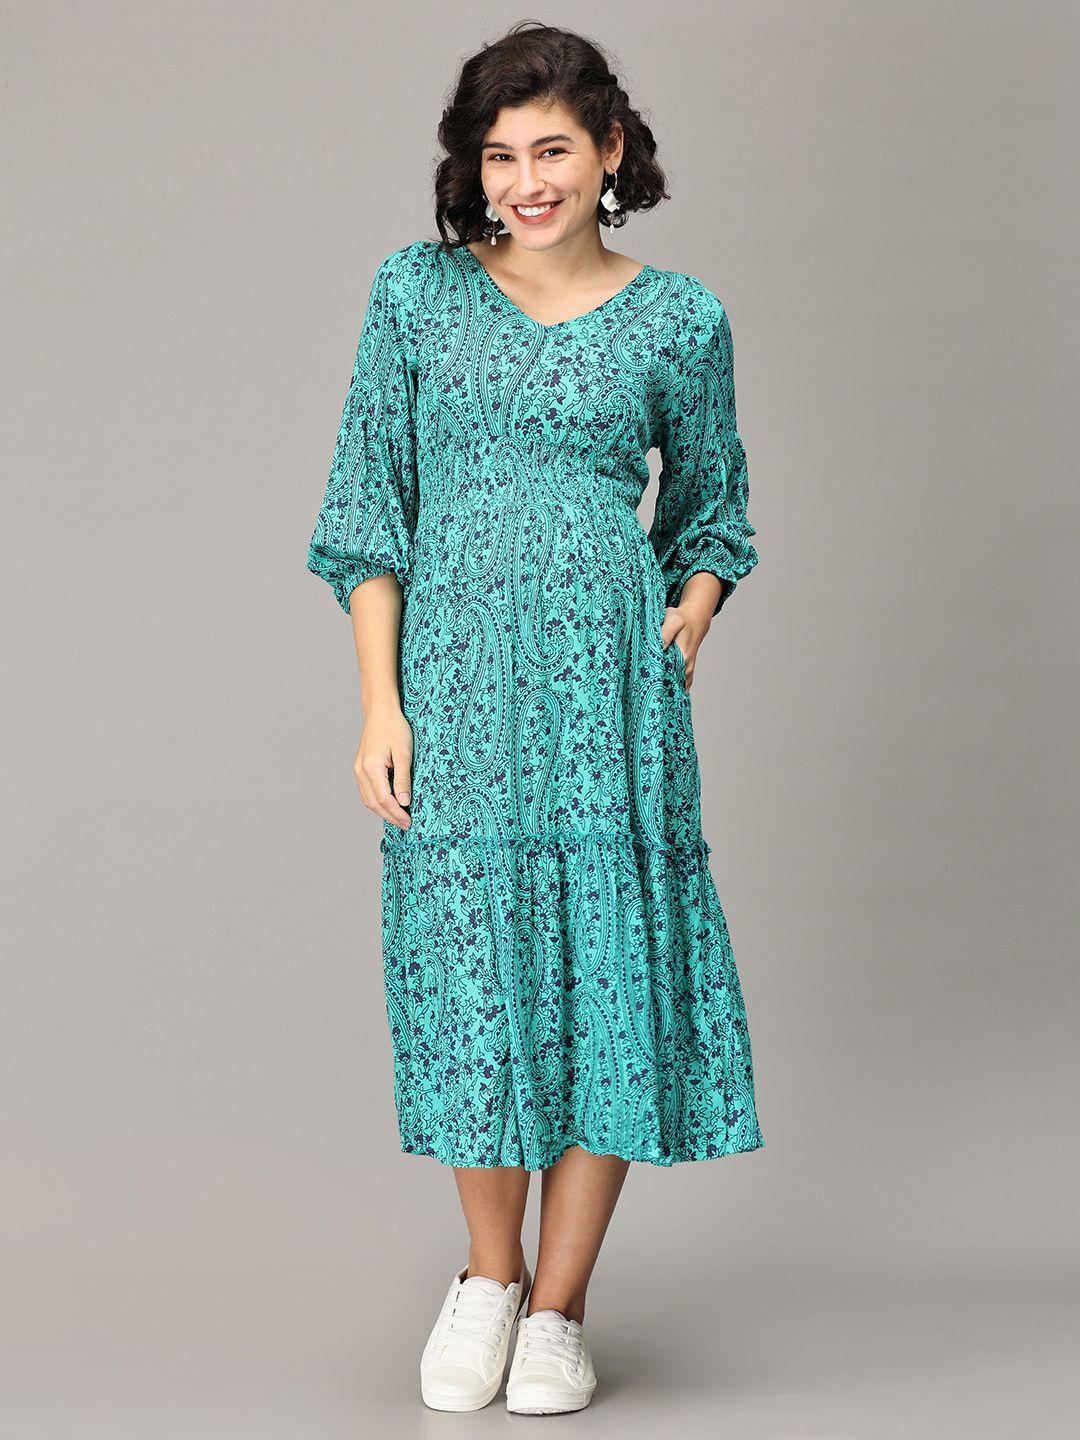 the mom store teal floral print empire midi dress